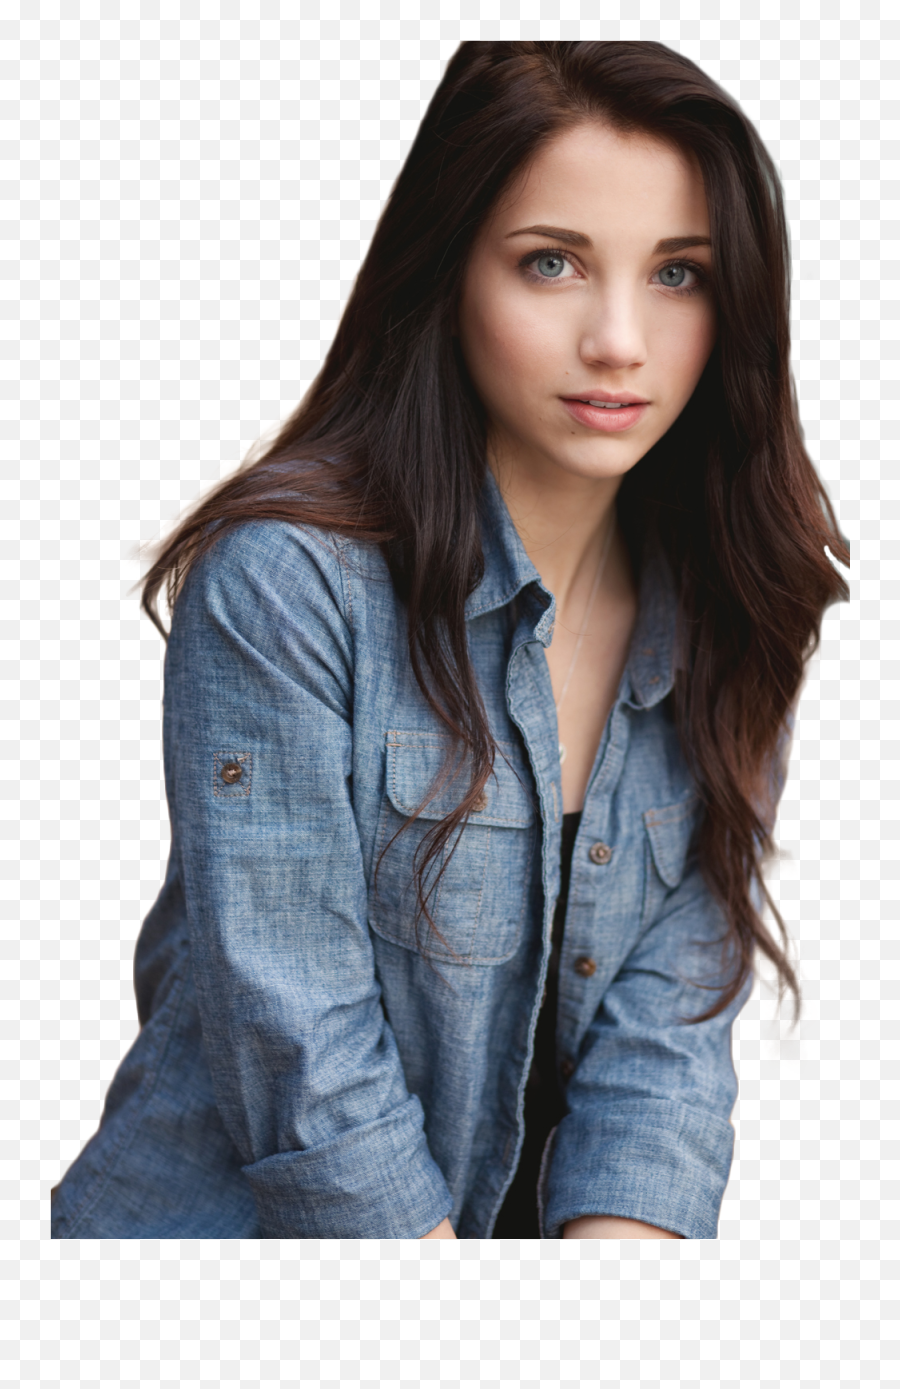 Emily Rudd Png Transparent Image - Teenage Female Face Claims,Emily Rudd Png